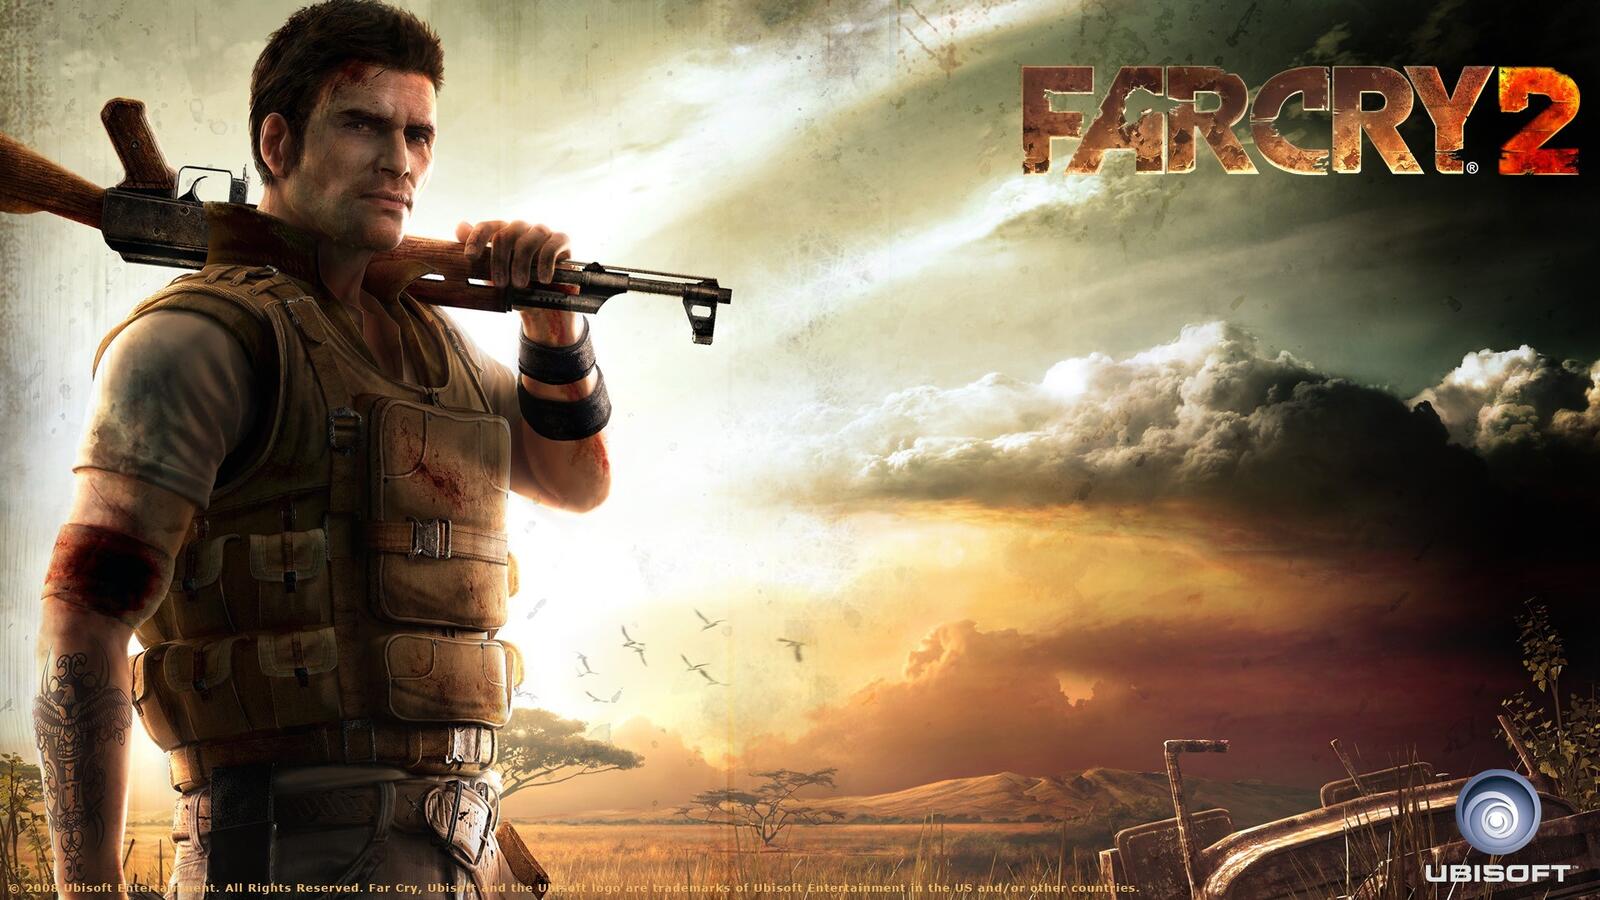 Free photo Picture from far cry 2 for pc